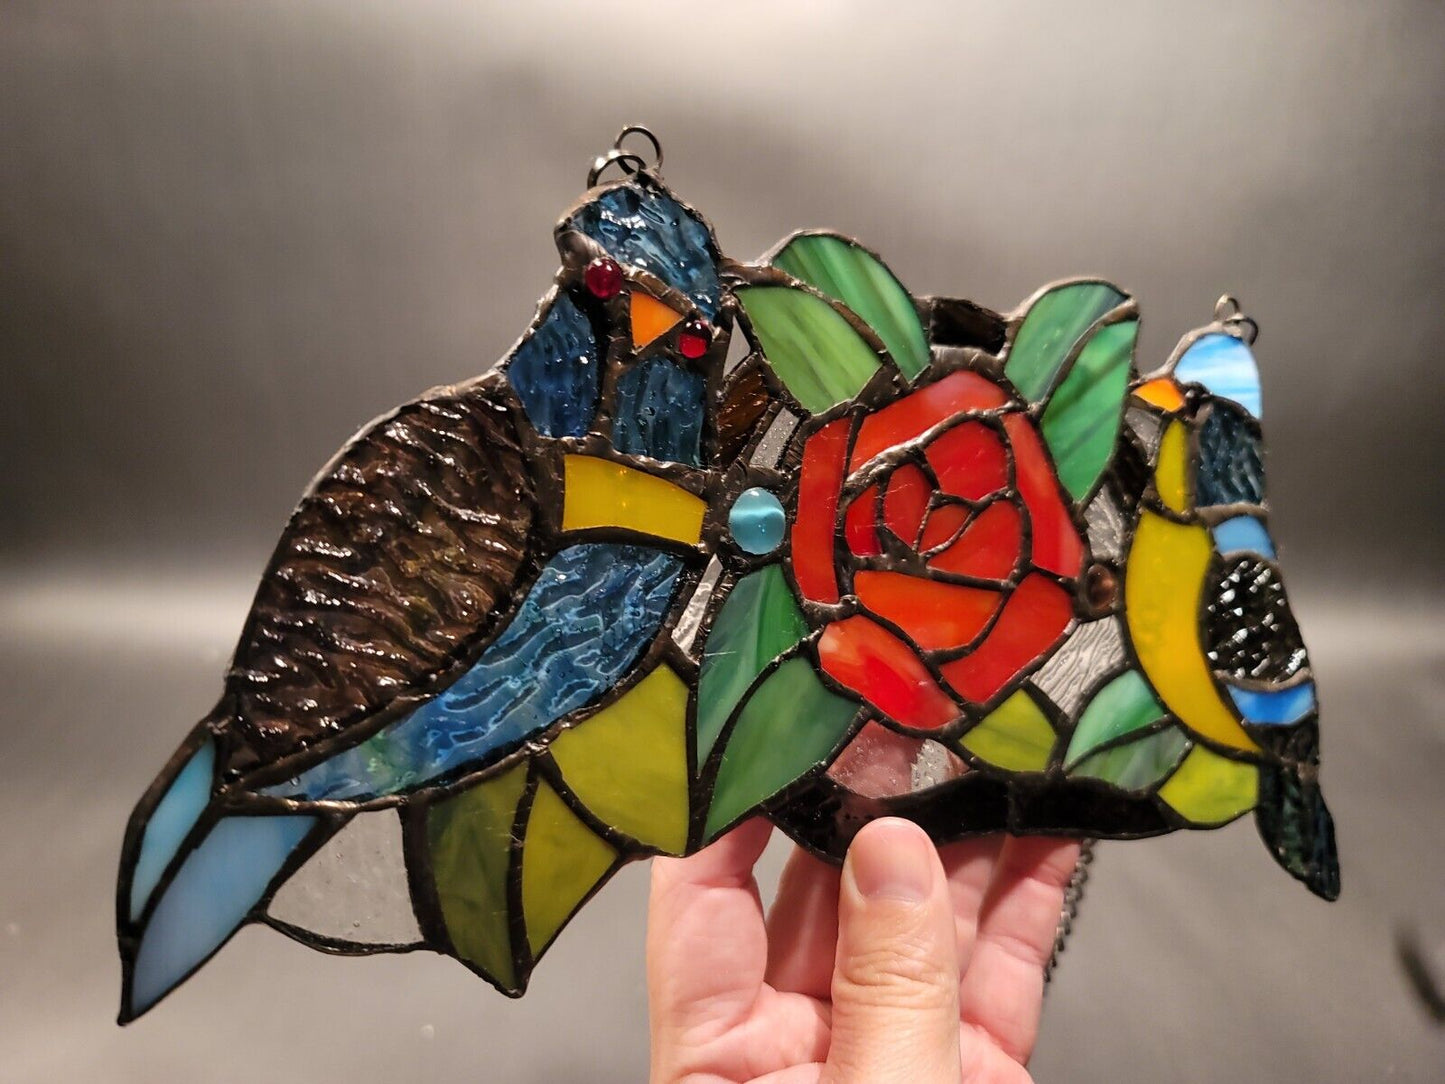 Antique Vintage Style Bird Rose Stained Glass Window Hanging Panel Suncatcher